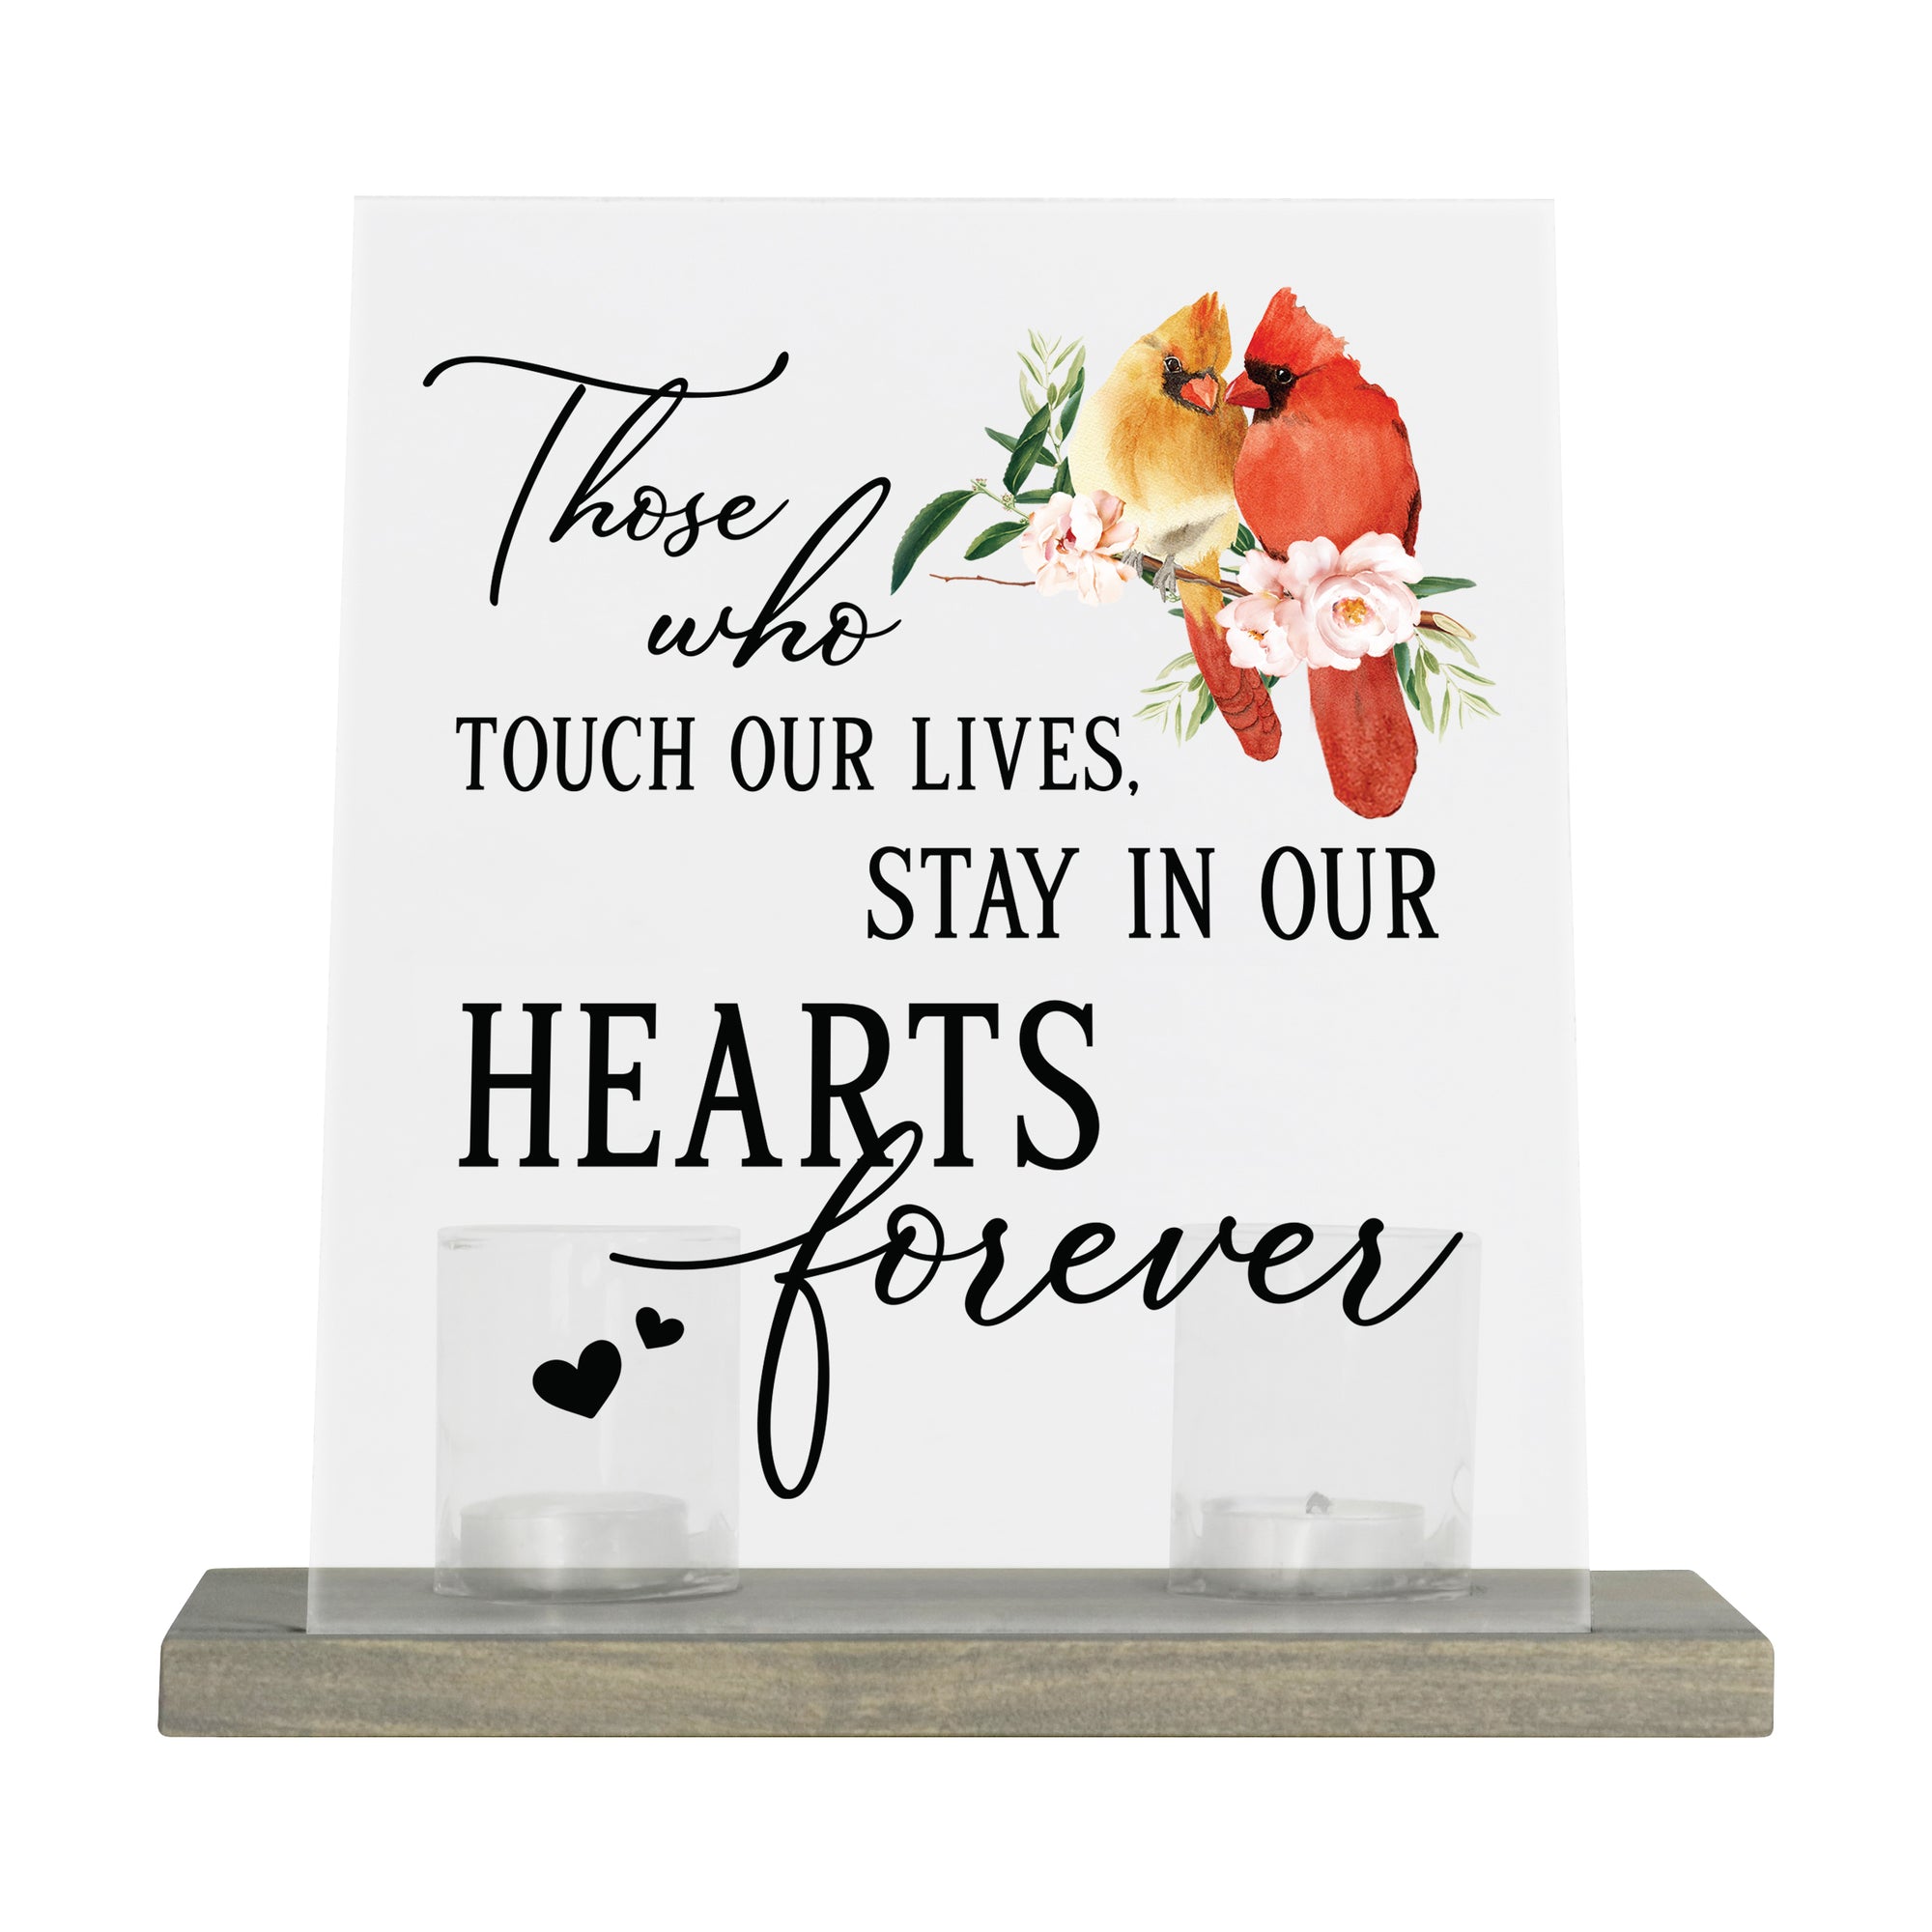 LifeSong Memorials Vintage Memorial Cardinal Acrylic Sign Candle Holder With Wood Base And Glass Votives For Home Decor | Those Who Touch. Acrylic candle holders, Vintage acrylic candle holders, glass candle holders for Living Room, Bedroom, Kitchen, Dining Room, and Entryways decor perfect memorial bereavement keepsake gift ideas for Family & Friends.